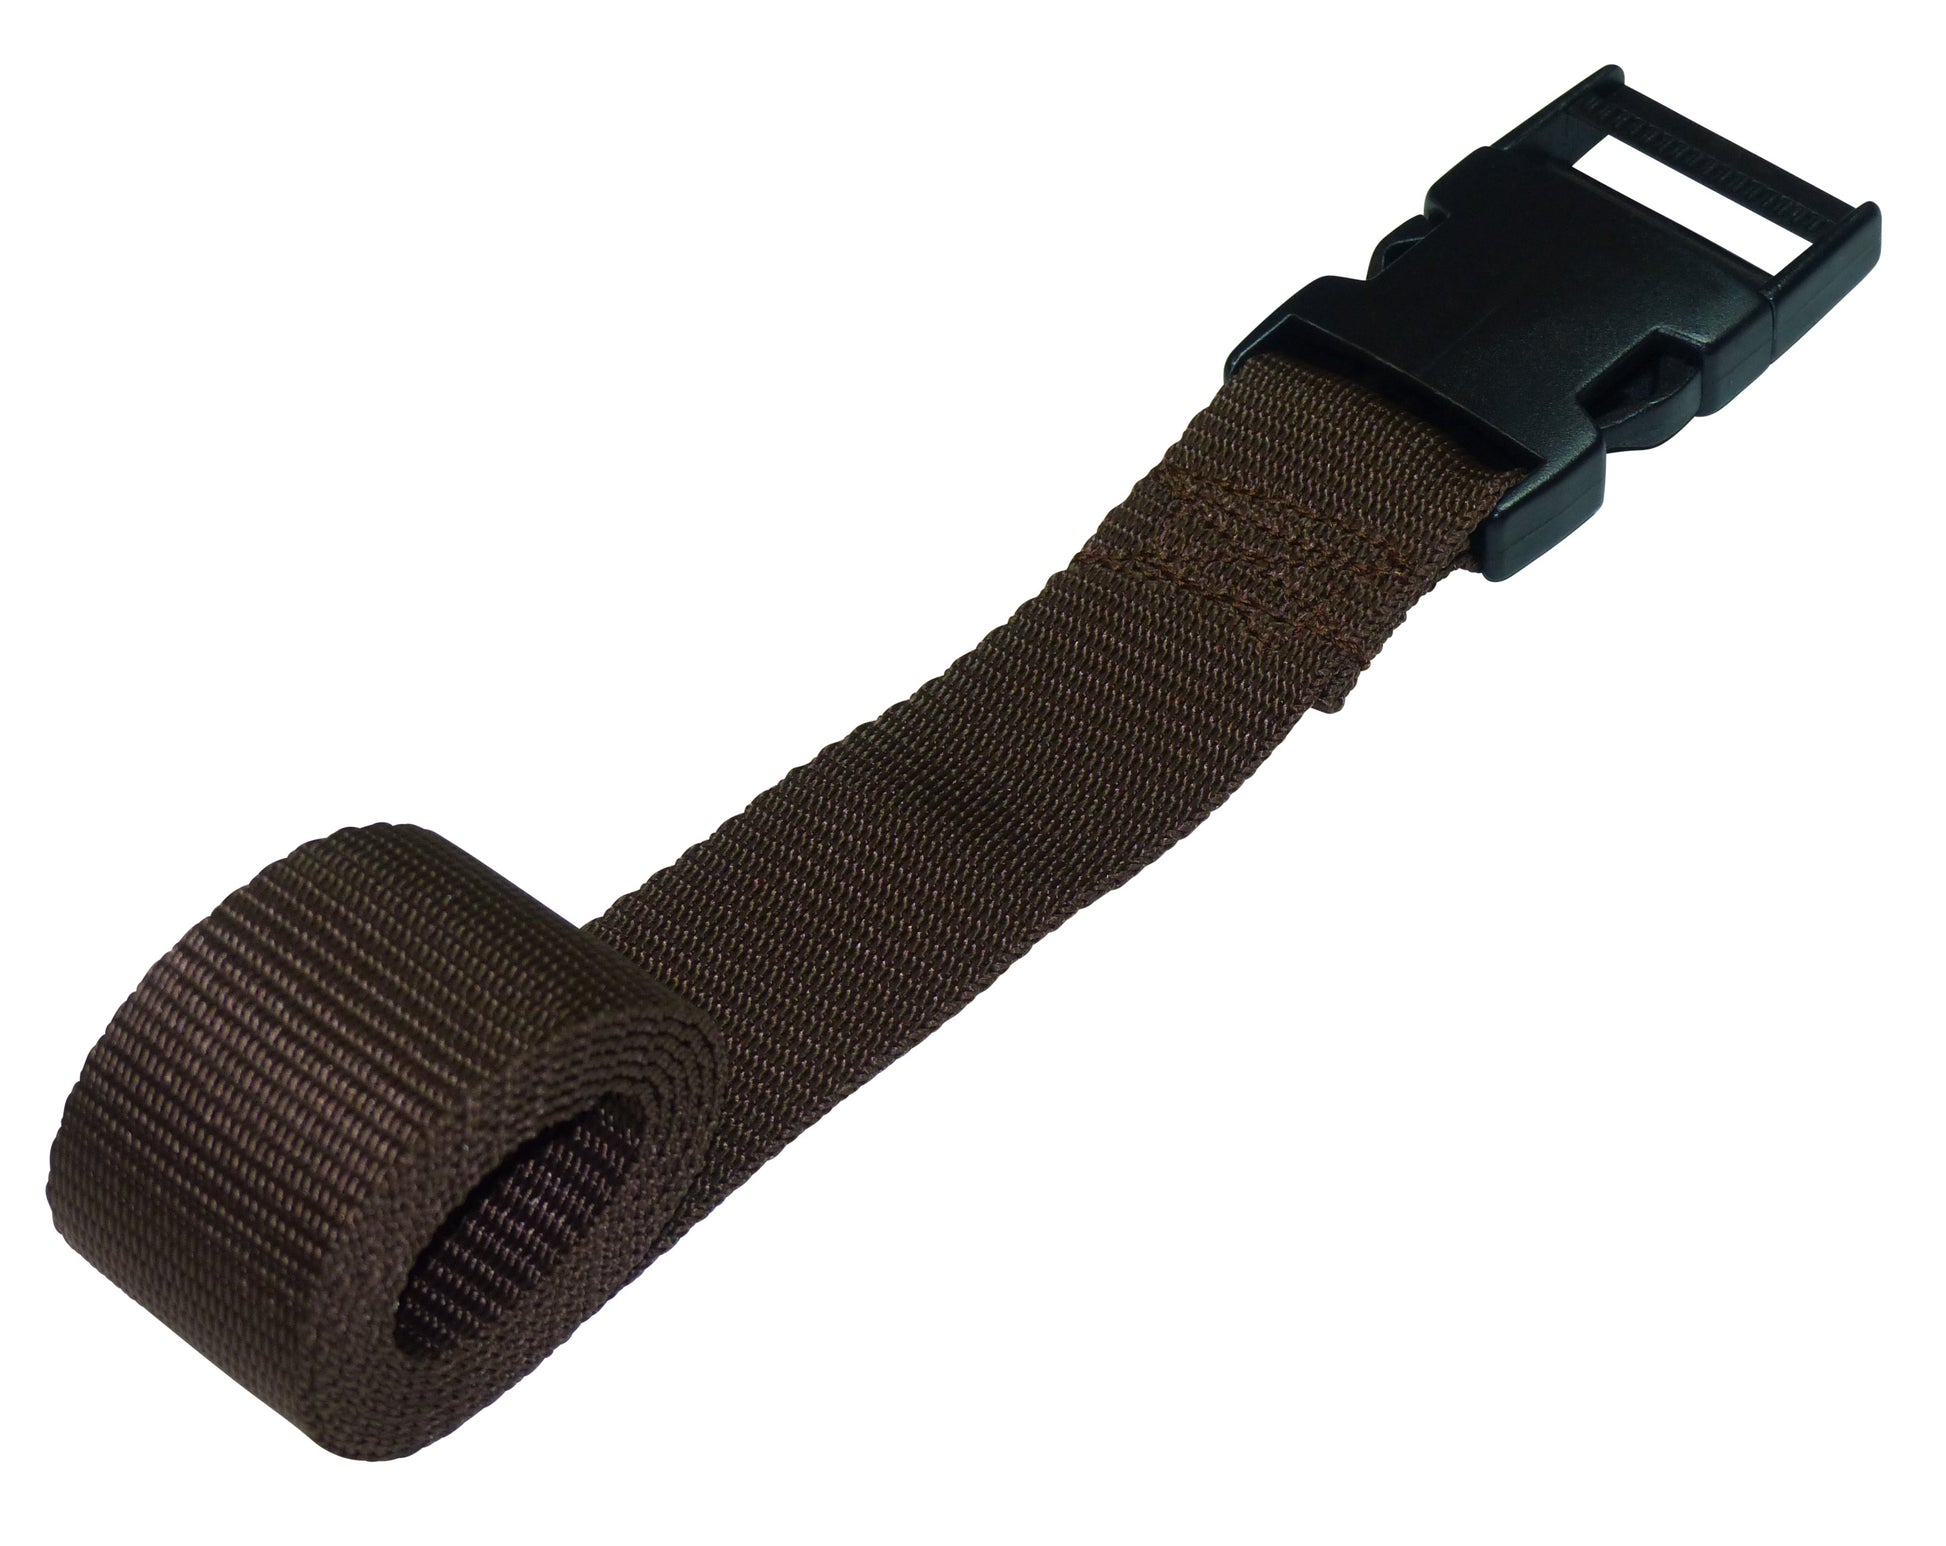 Benristraps 38mm Webbing Strap with Quick Release Buckle in olive green